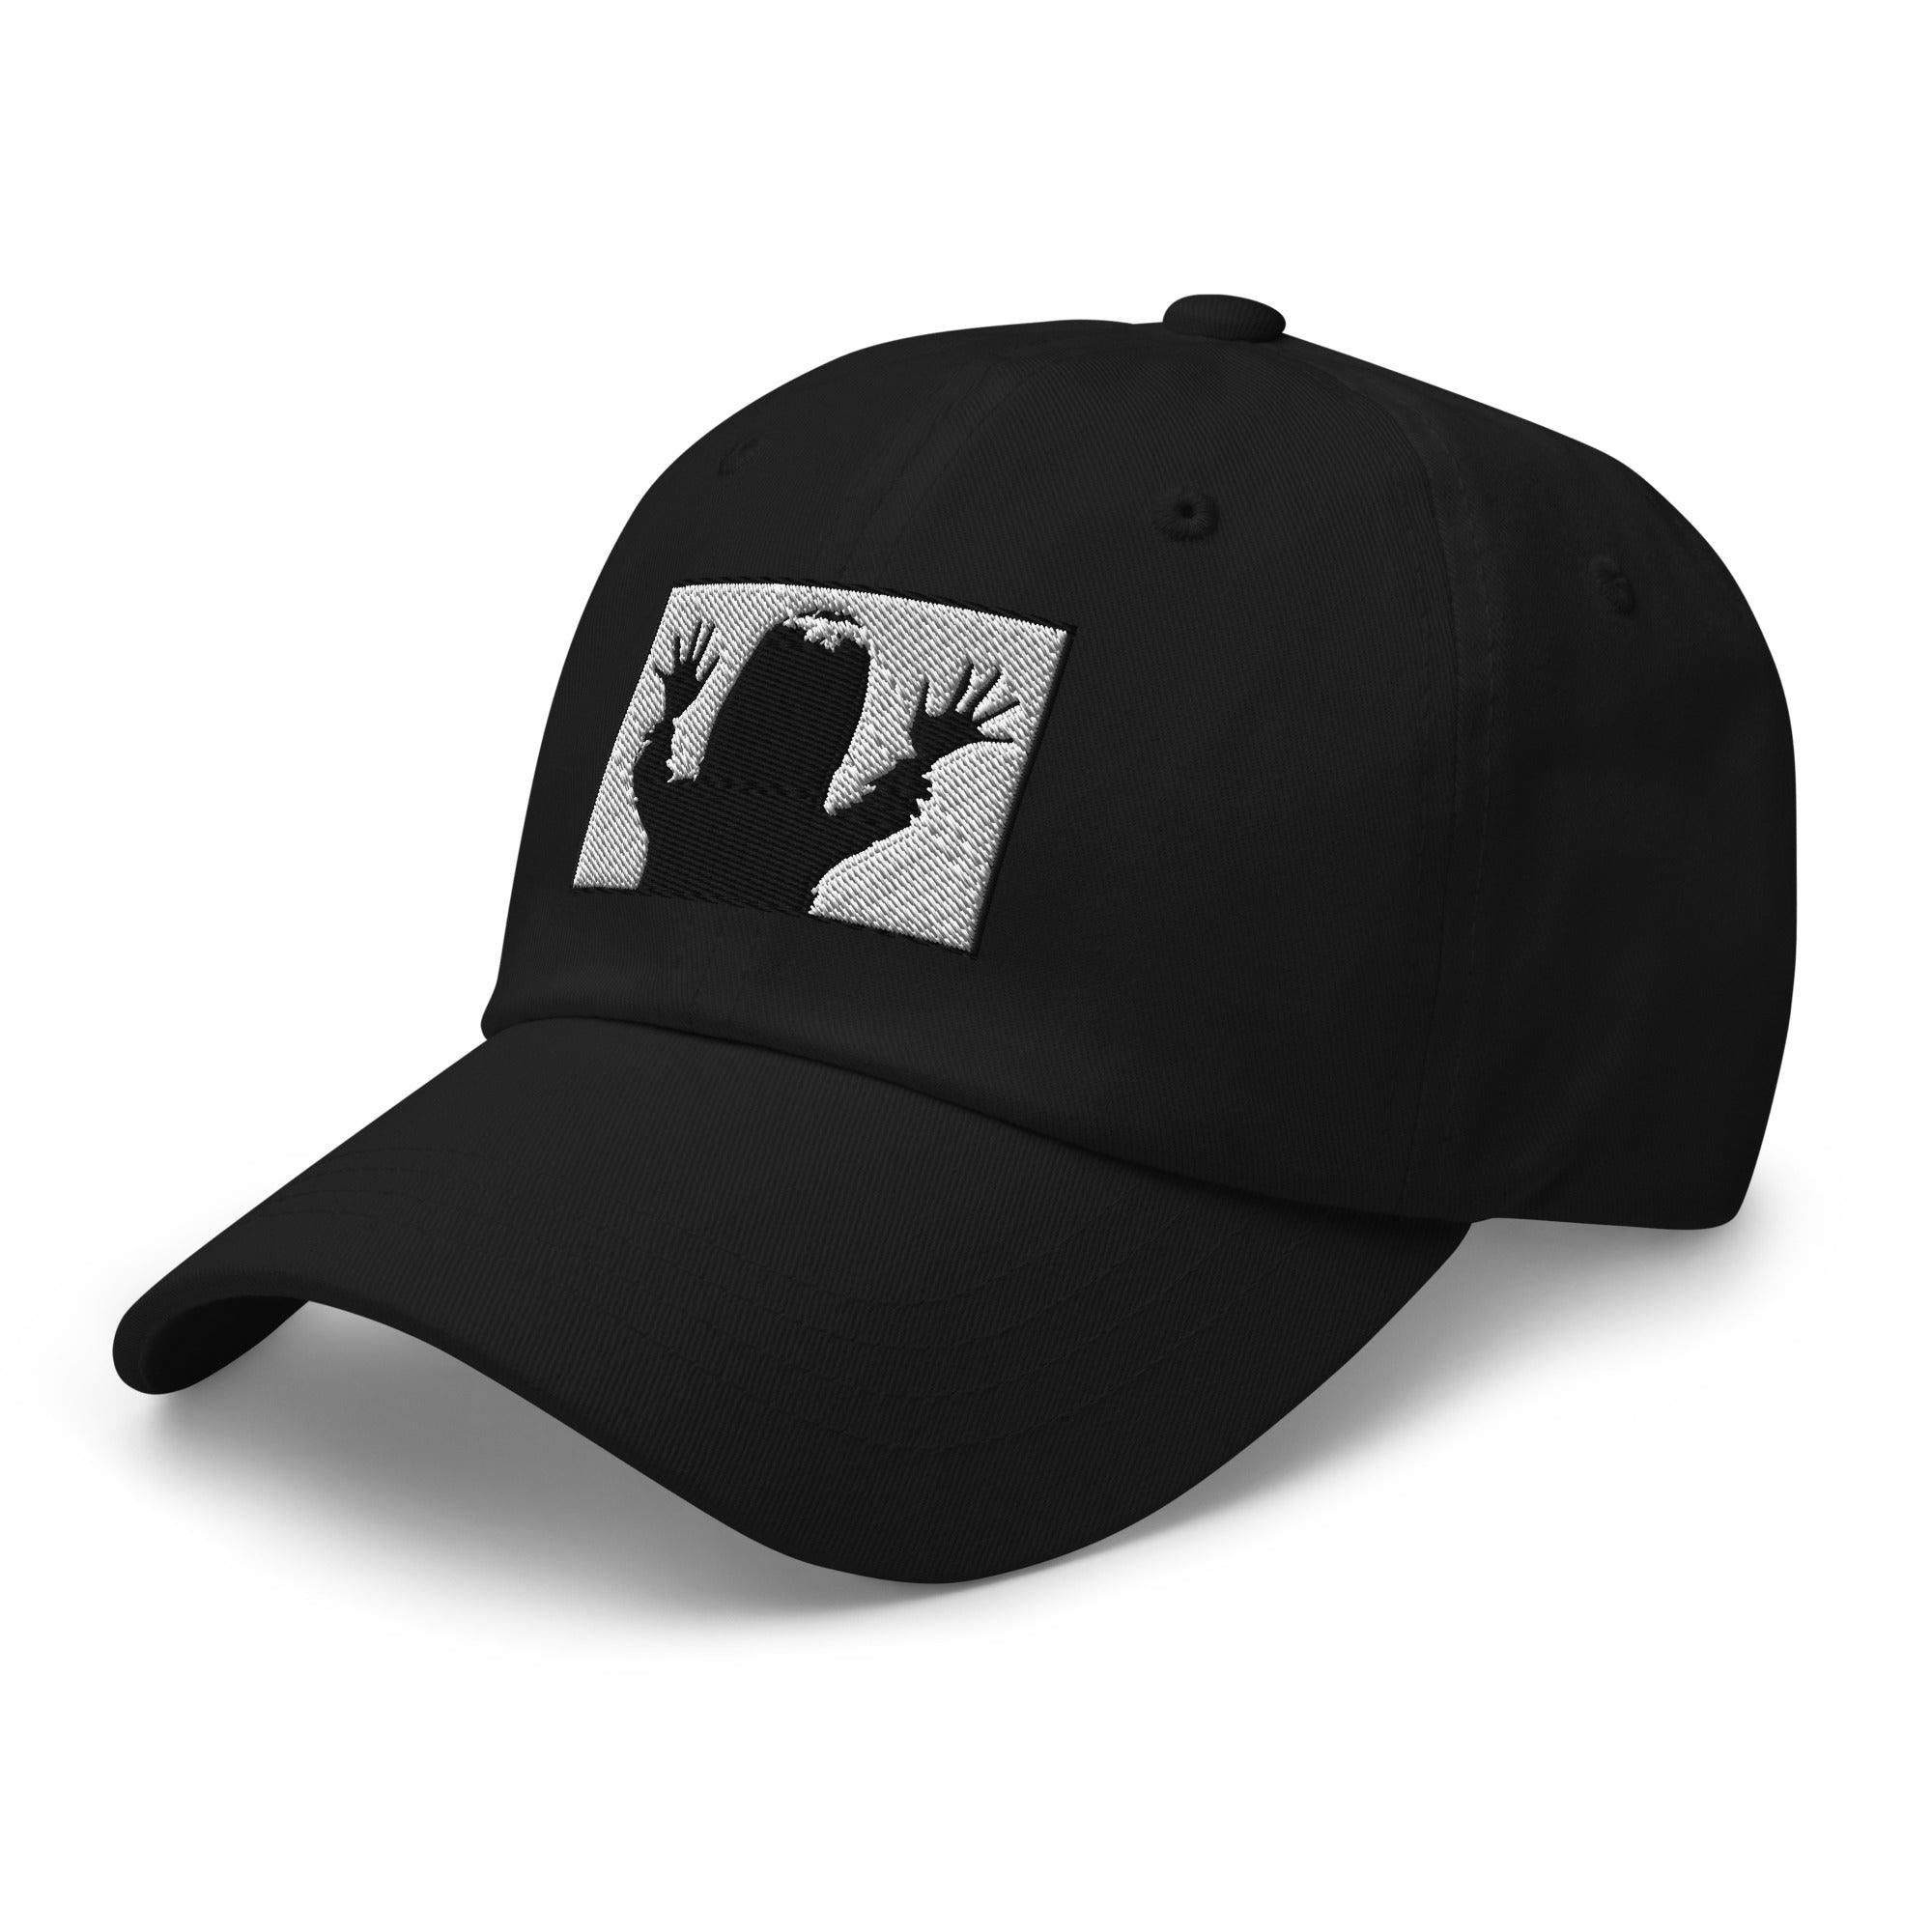 "They're Here" Carol Anne Poltergeist Embroidered Baseball Cap Horror Movie Dad hat - Edge of Life Designs